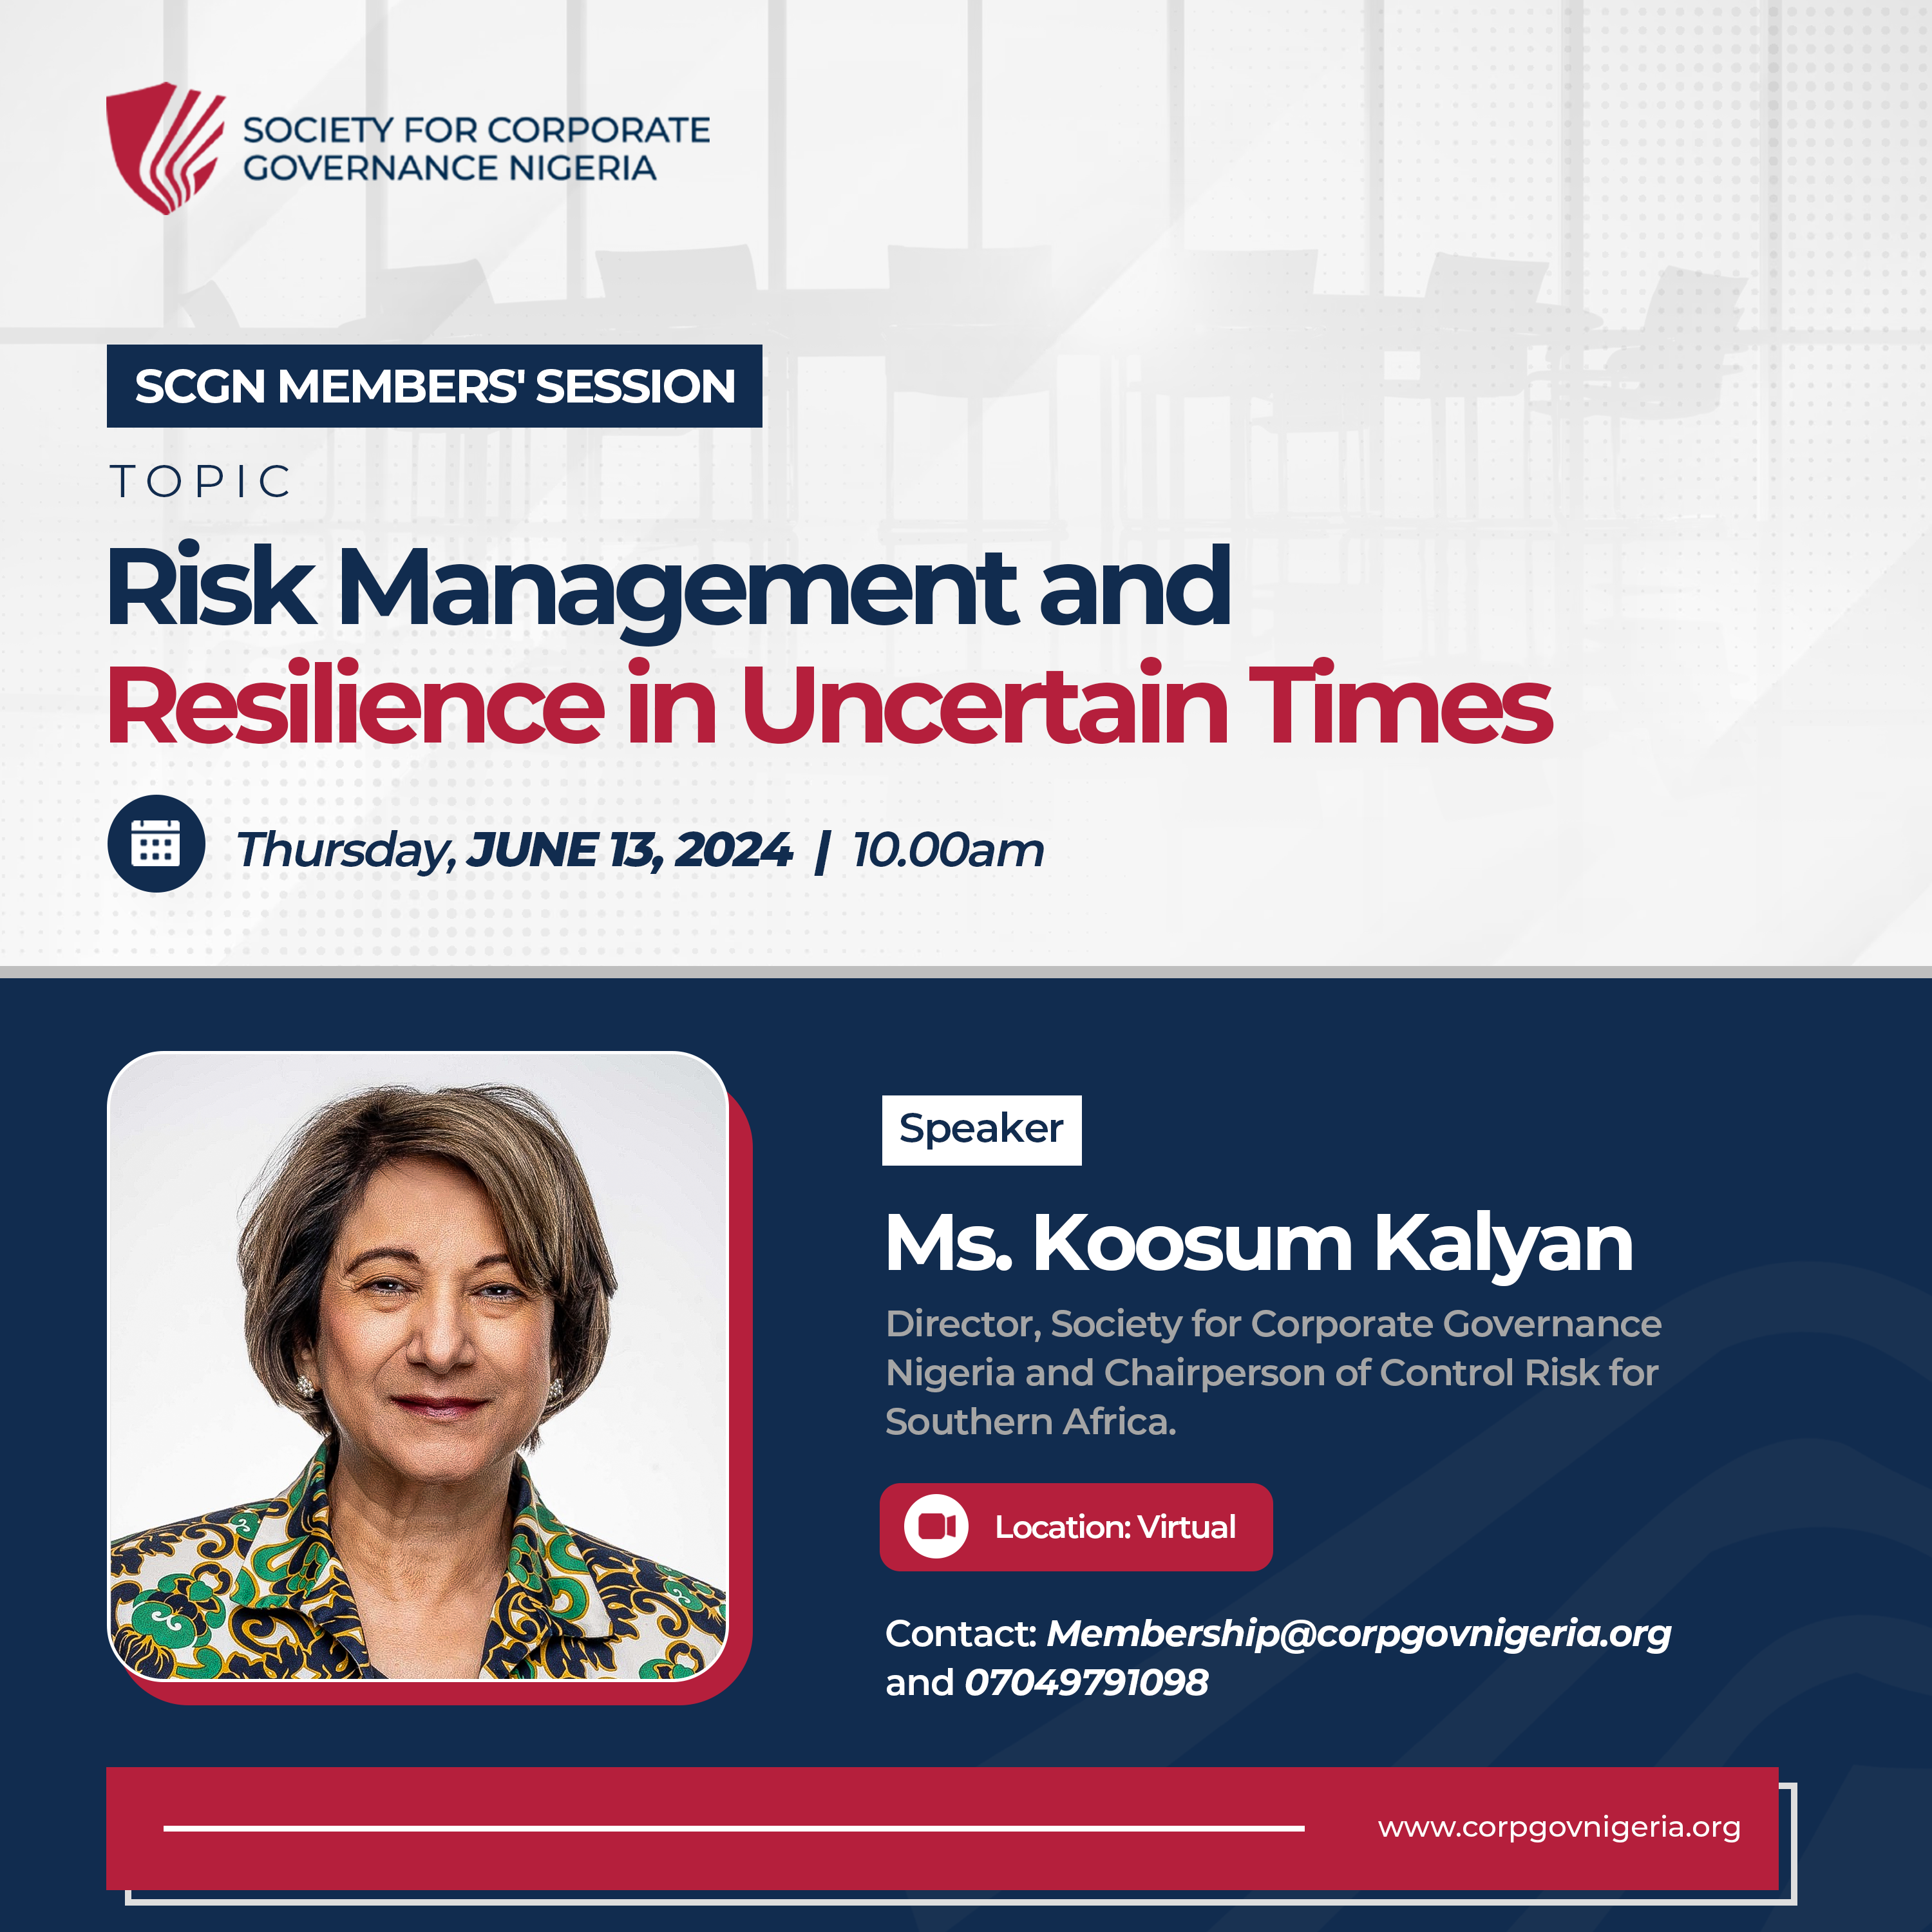 Risk Management and Resilience in Uncertain Times